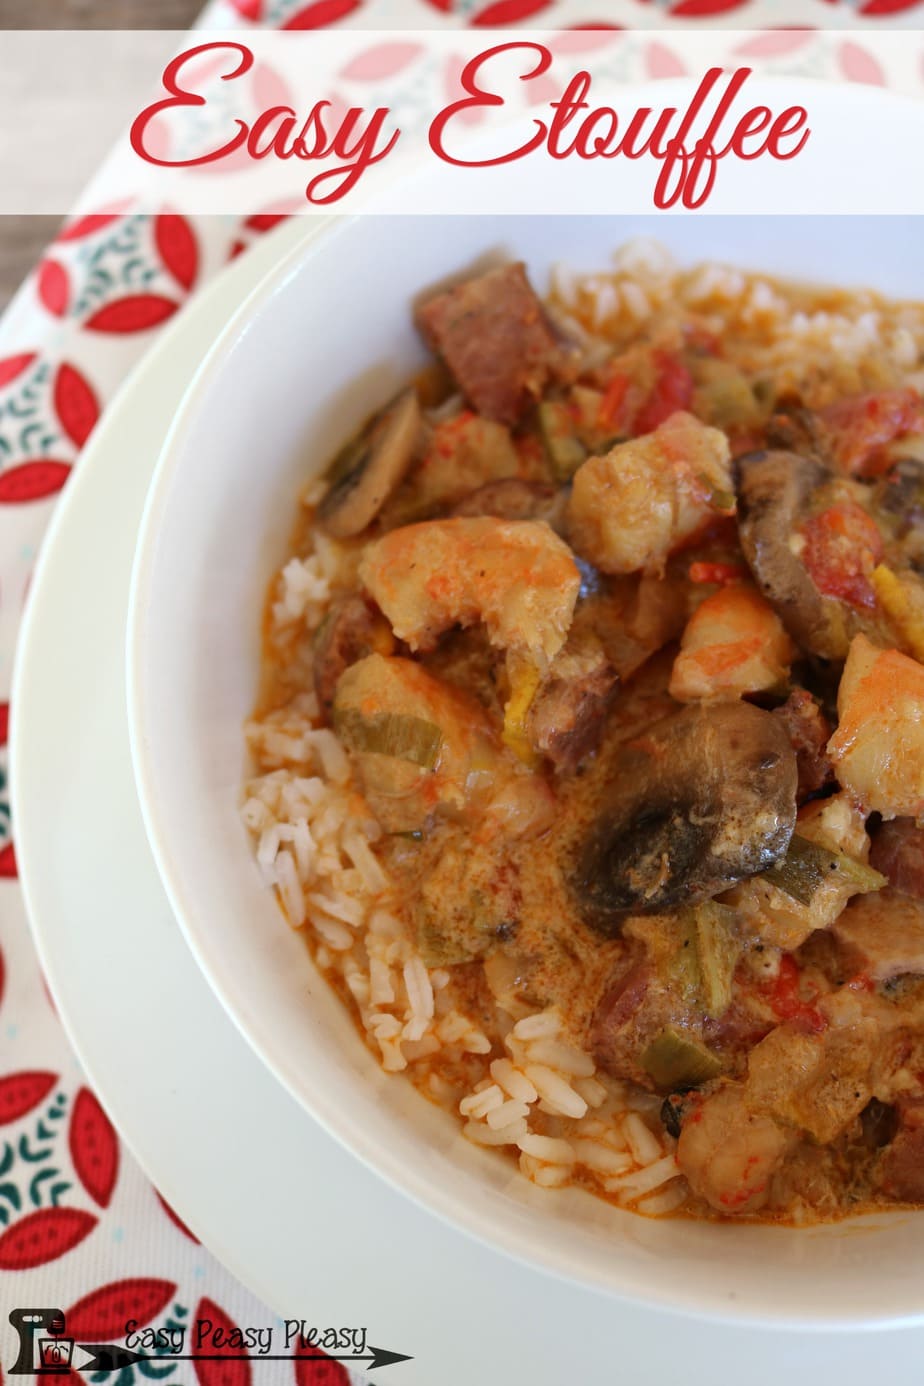 Make this deliciously easy and hearty Etouffee using simple ingredients.